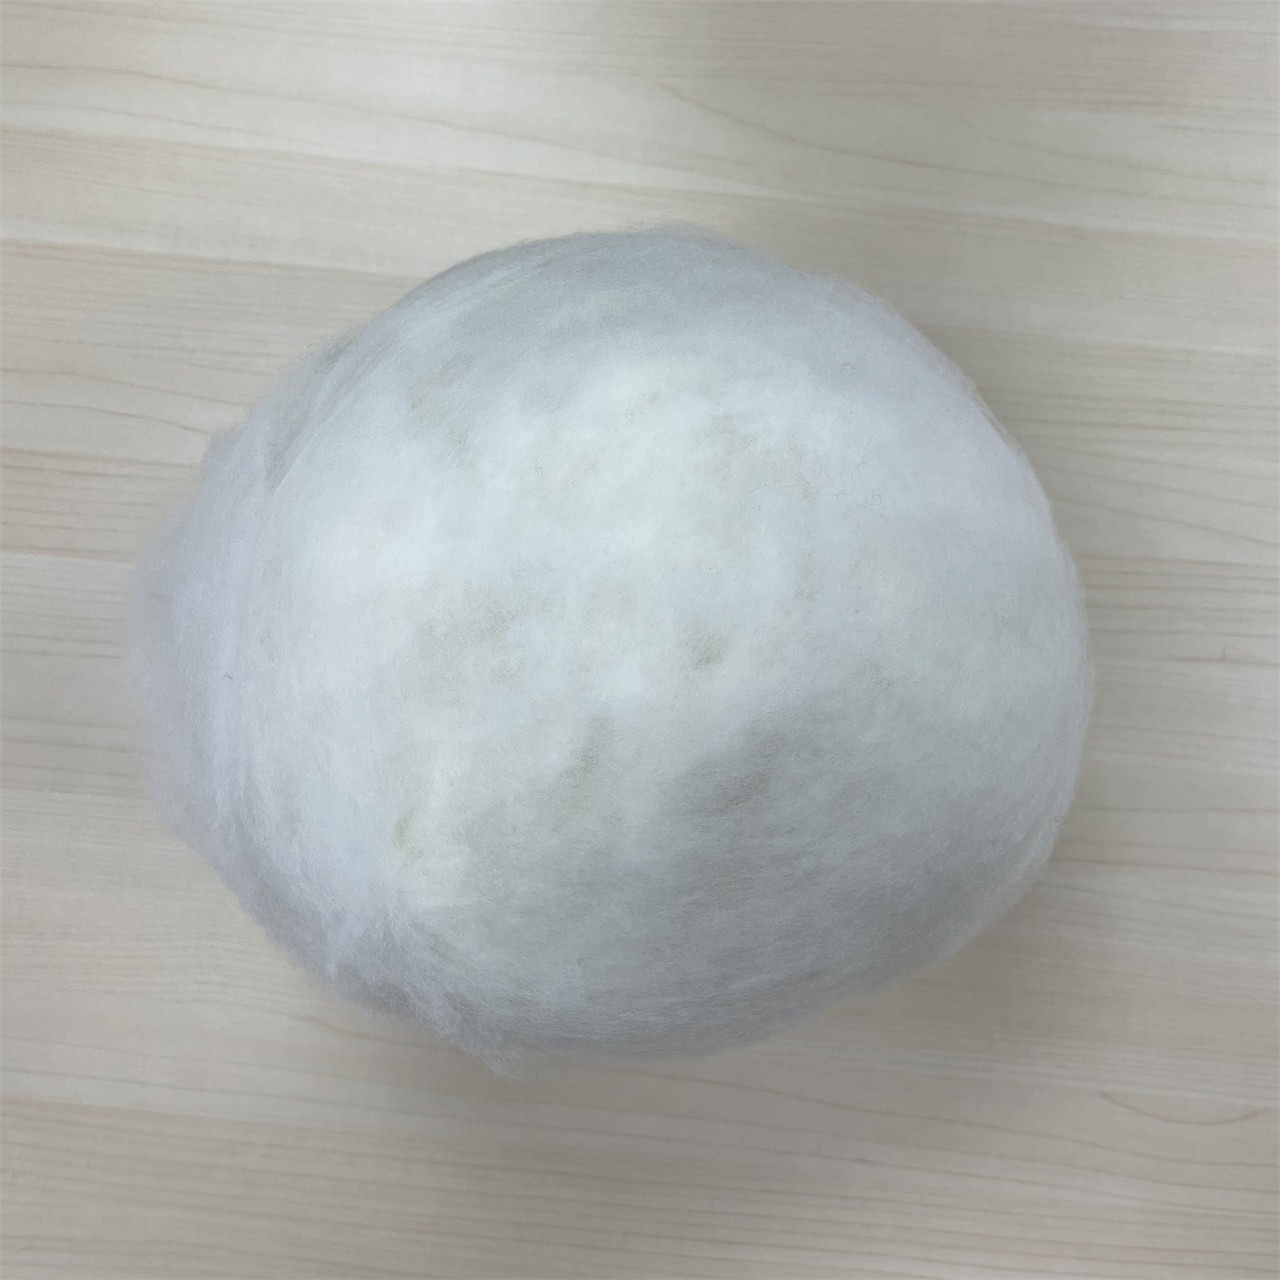 super selected Chinese sheep wool white